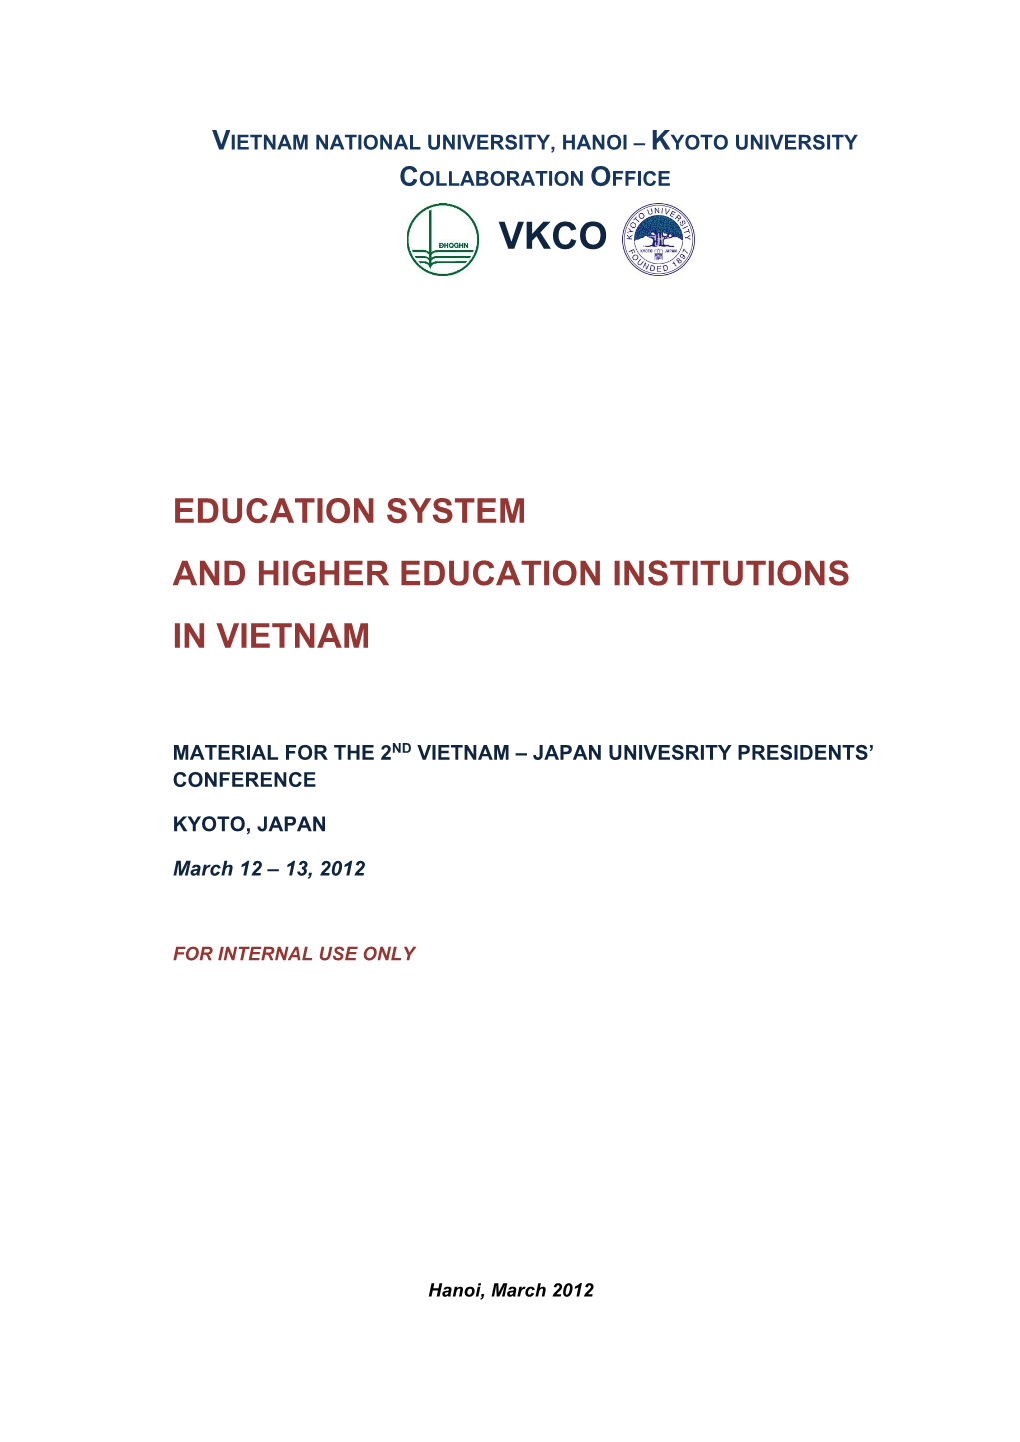 Education System and Higher Education Institutions in Vietnam